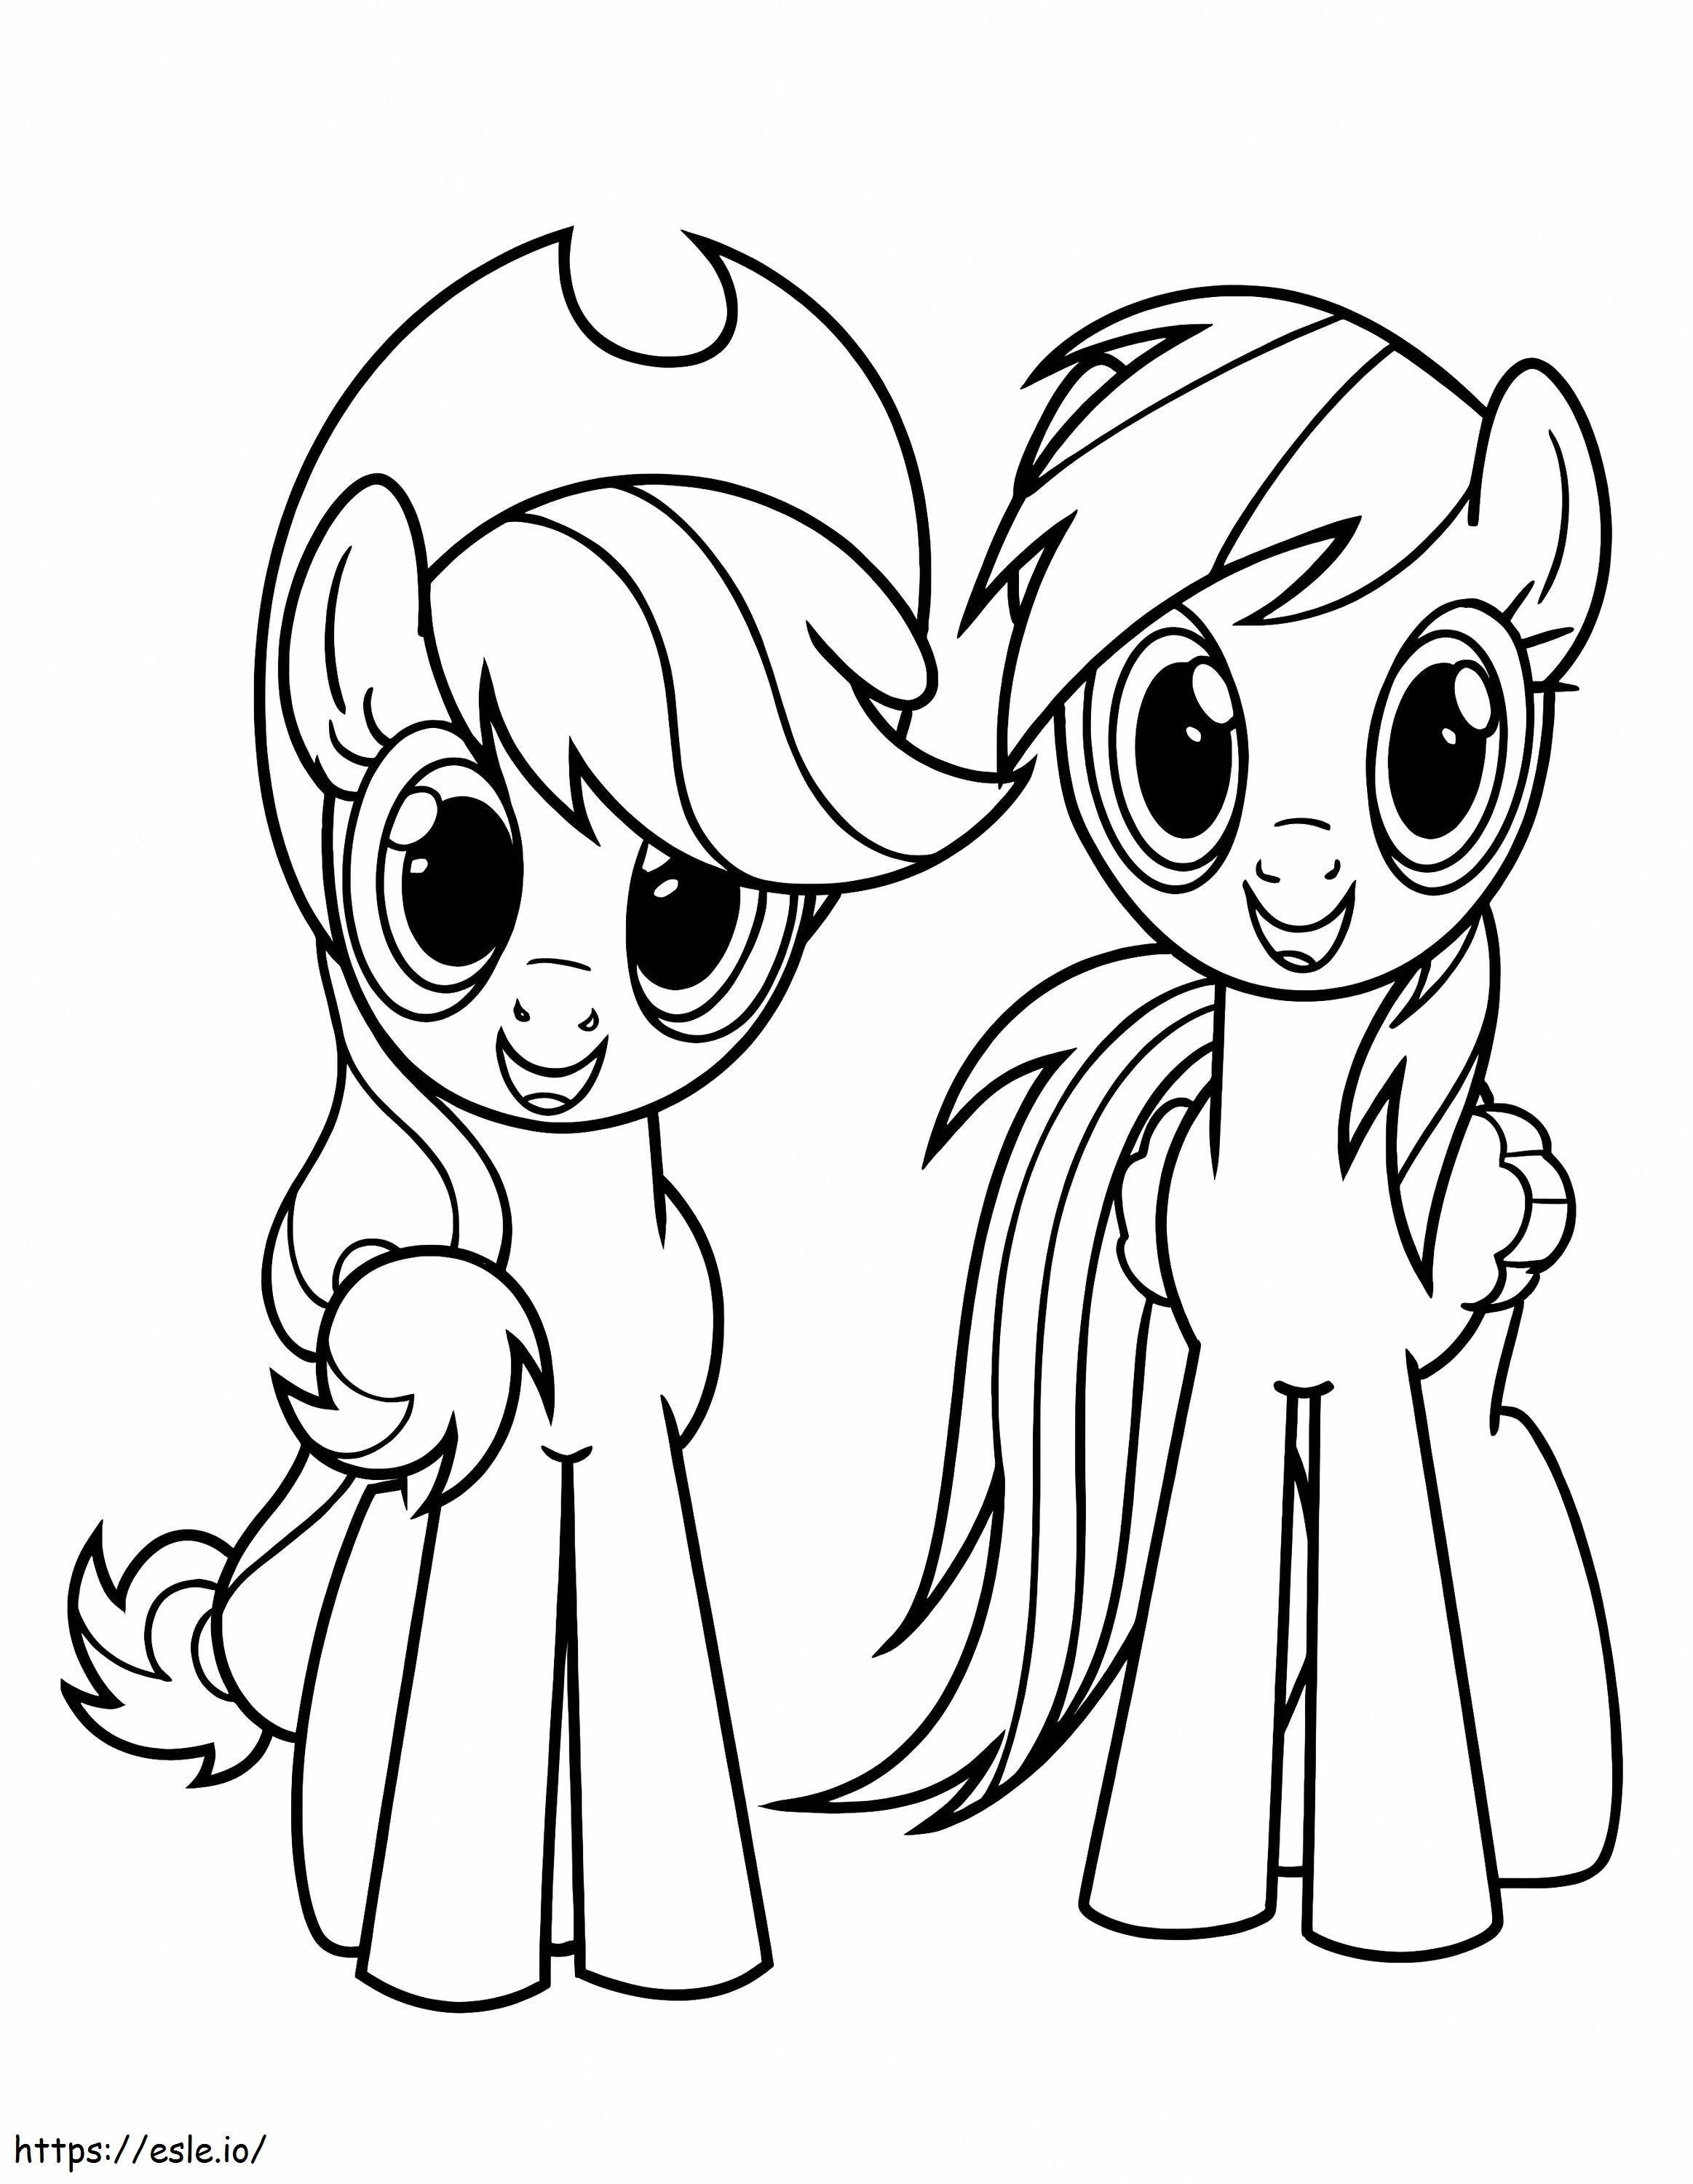 Applejack And Rainbow Dash coloring page